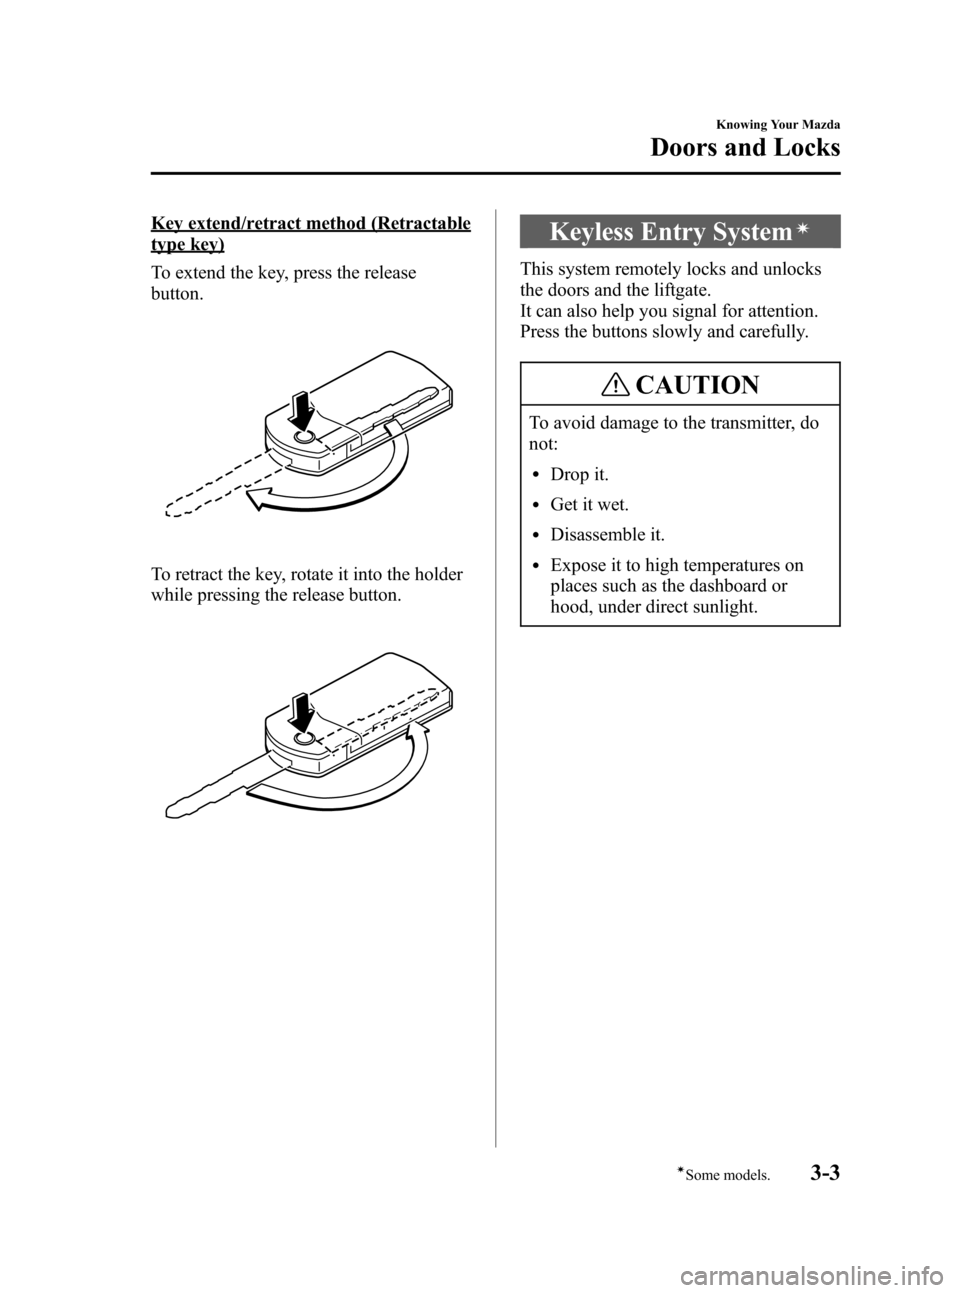 MAZDA MODEL 3 HATCHBACK 2007  Owners Manual (in English) Black plate (77,1)
Key extend/retract method (Retractable
type key)
To extend the key, press the release
button.
To retract the key, rotate it into the holder
while pressing the release button.
Keyles